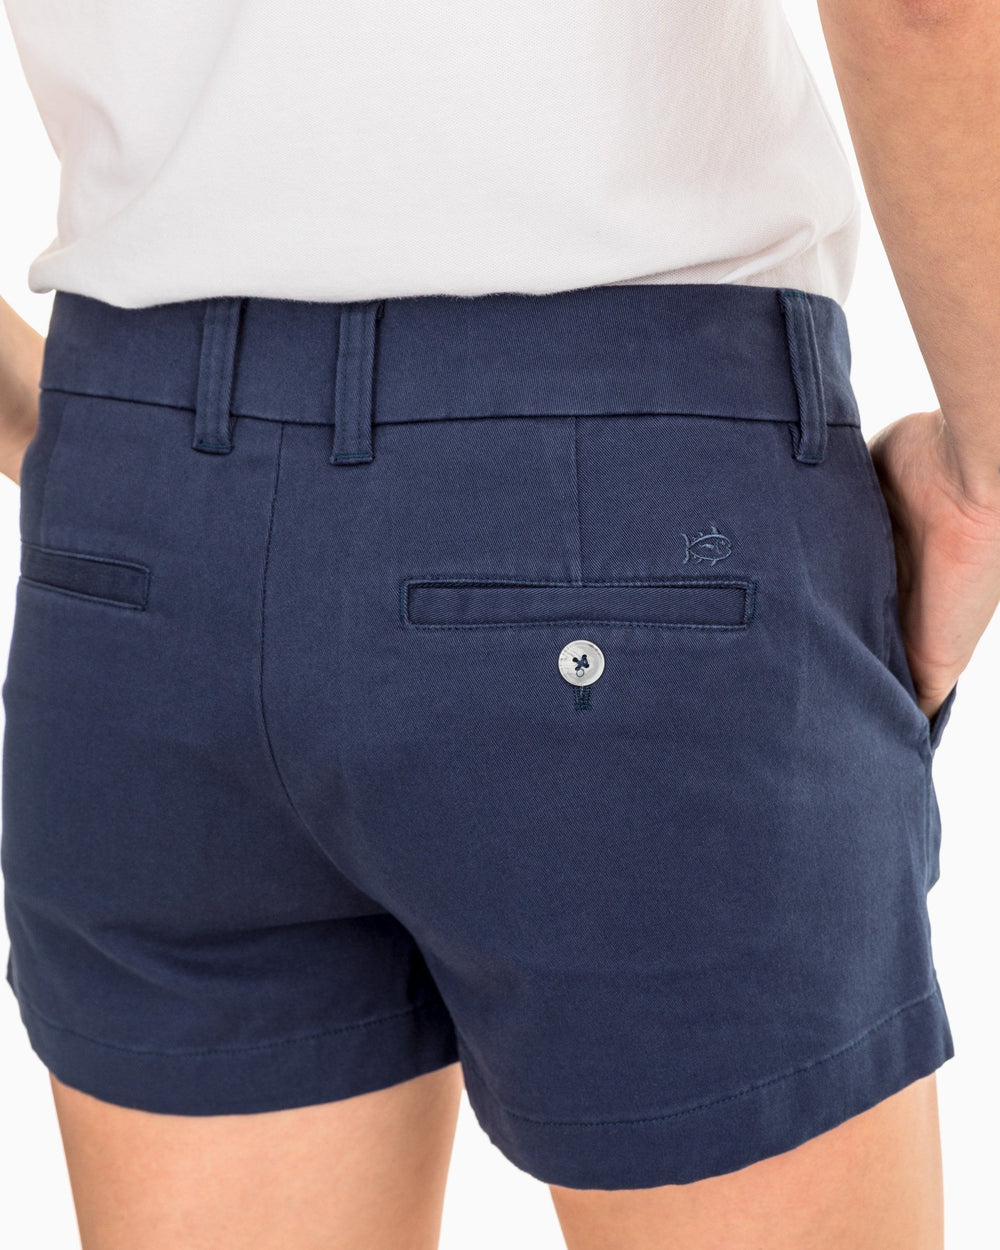 The pocket view of the Women's Navy 3 Inch Leah Short by Southern Tide - Nautical Navy